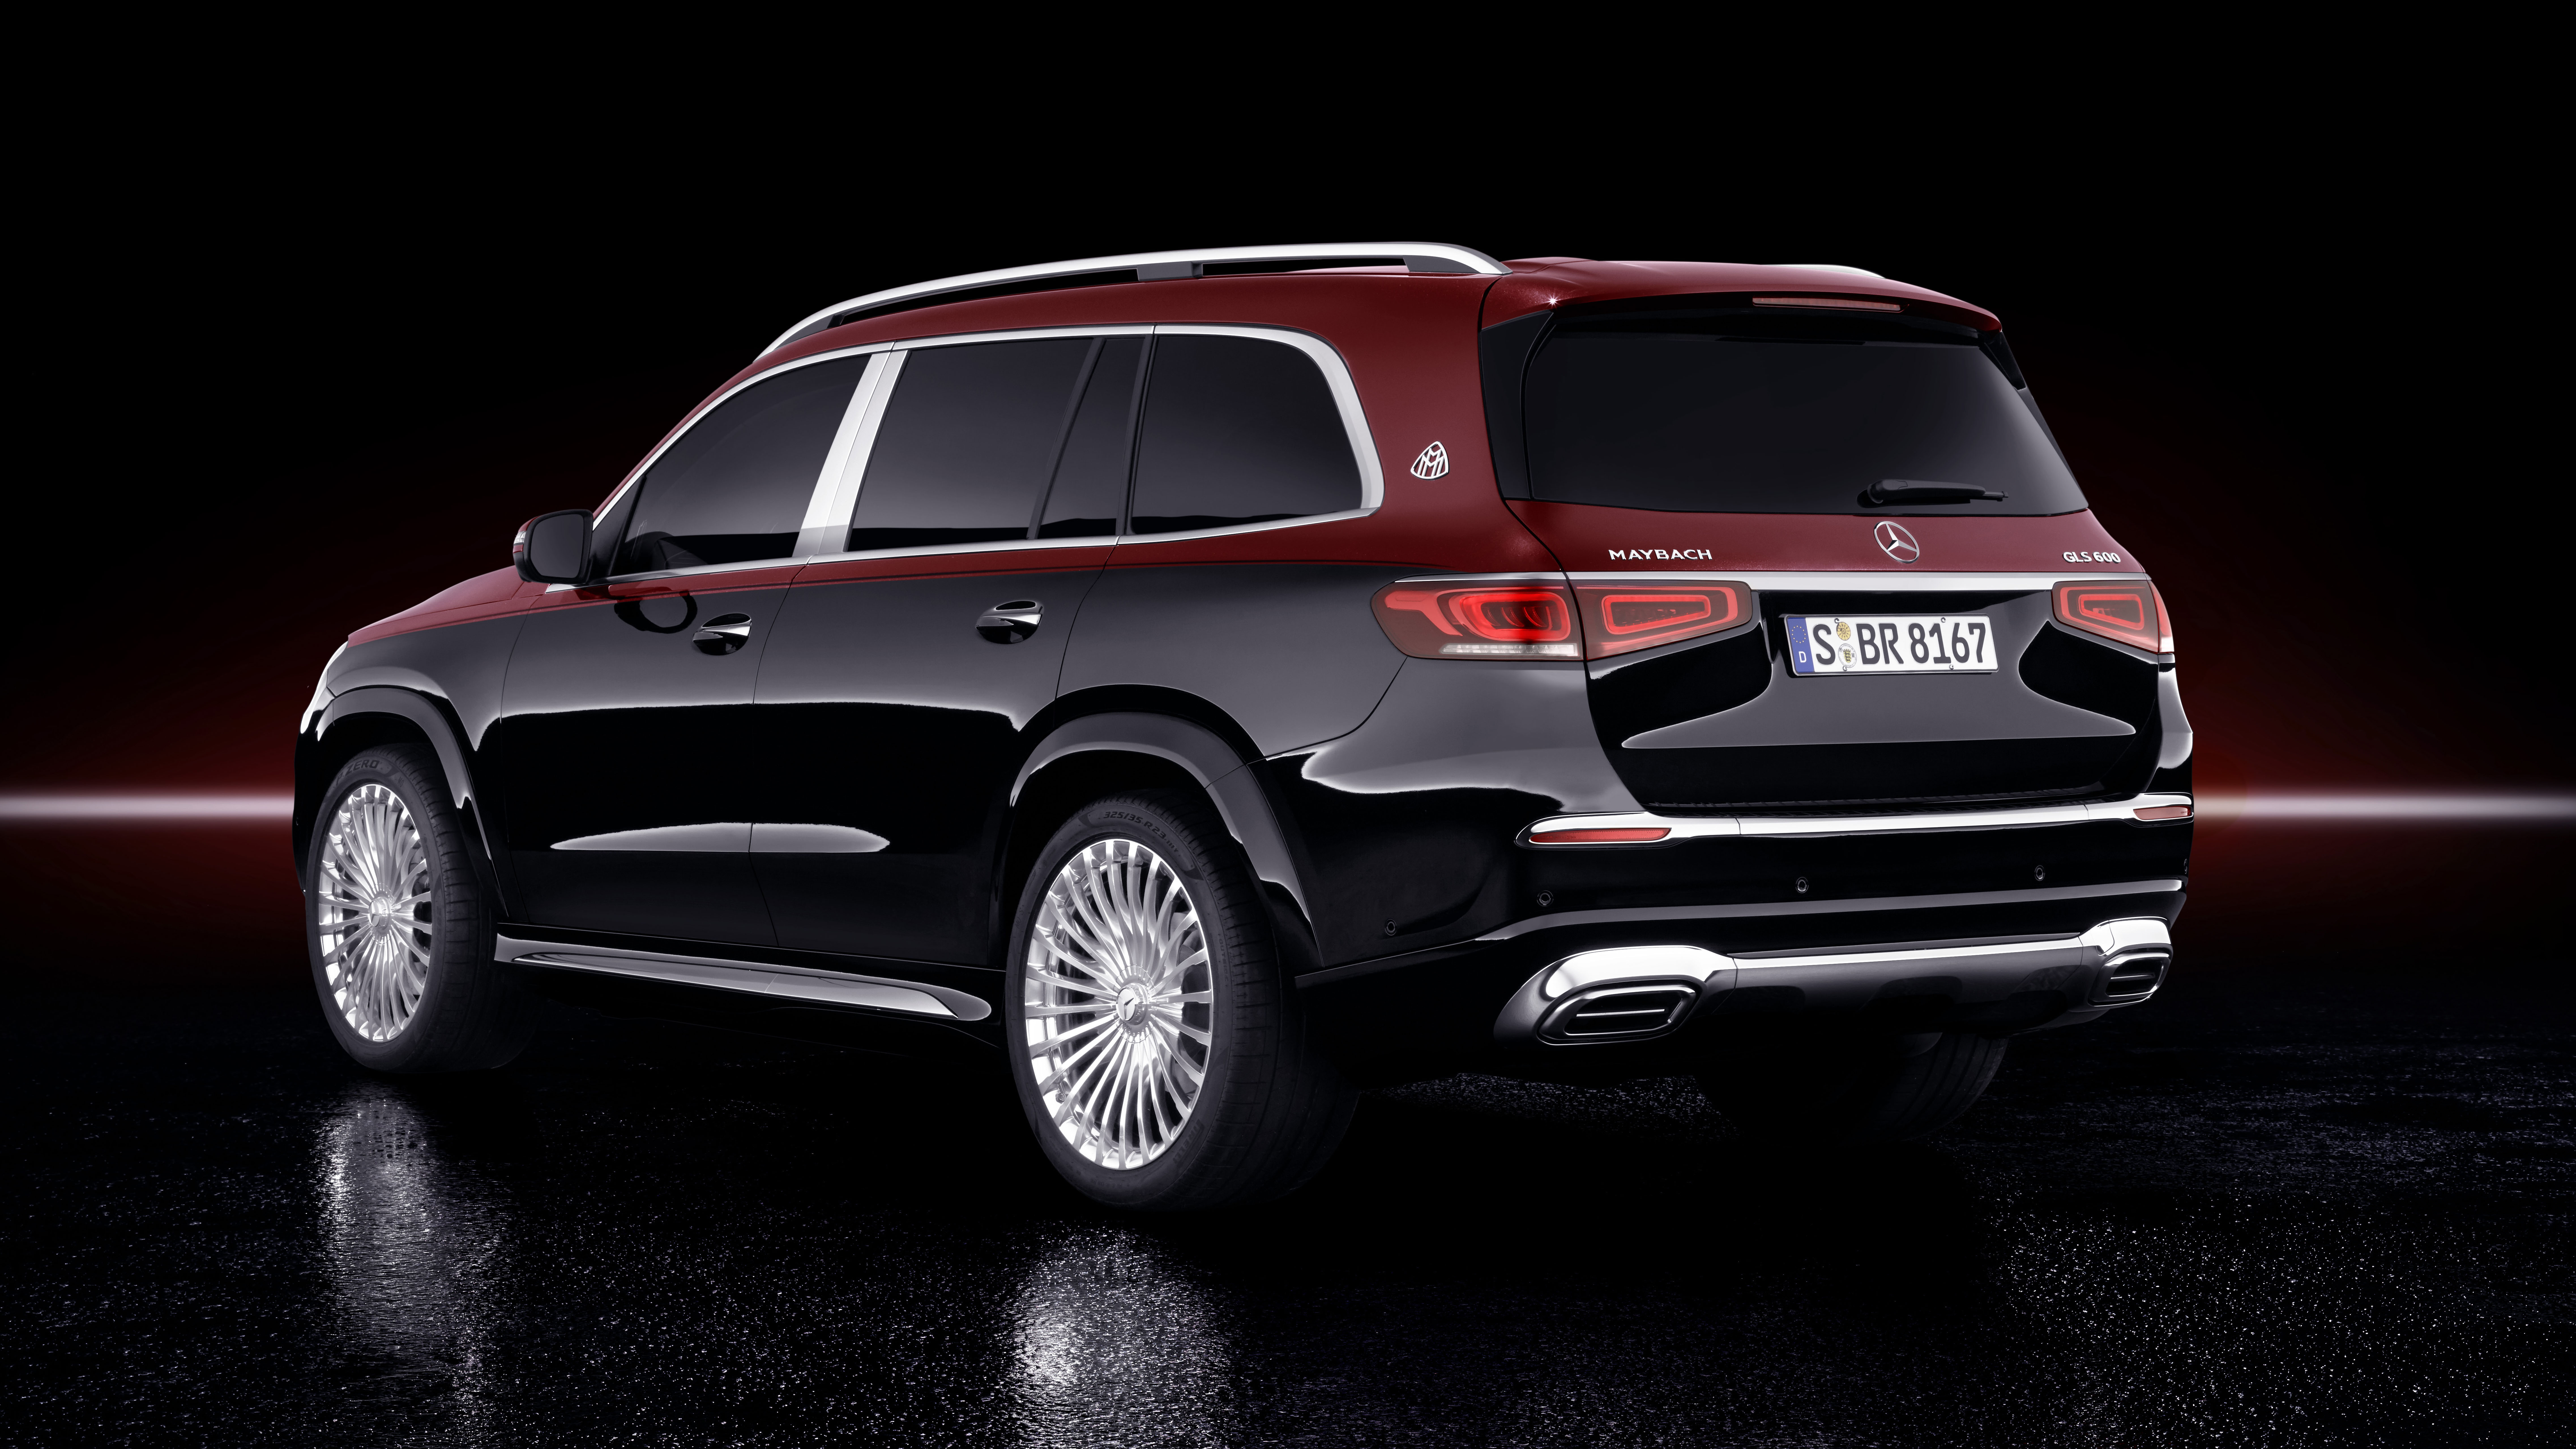 Kneel, peasants, before the might of the Maybach GLS 600